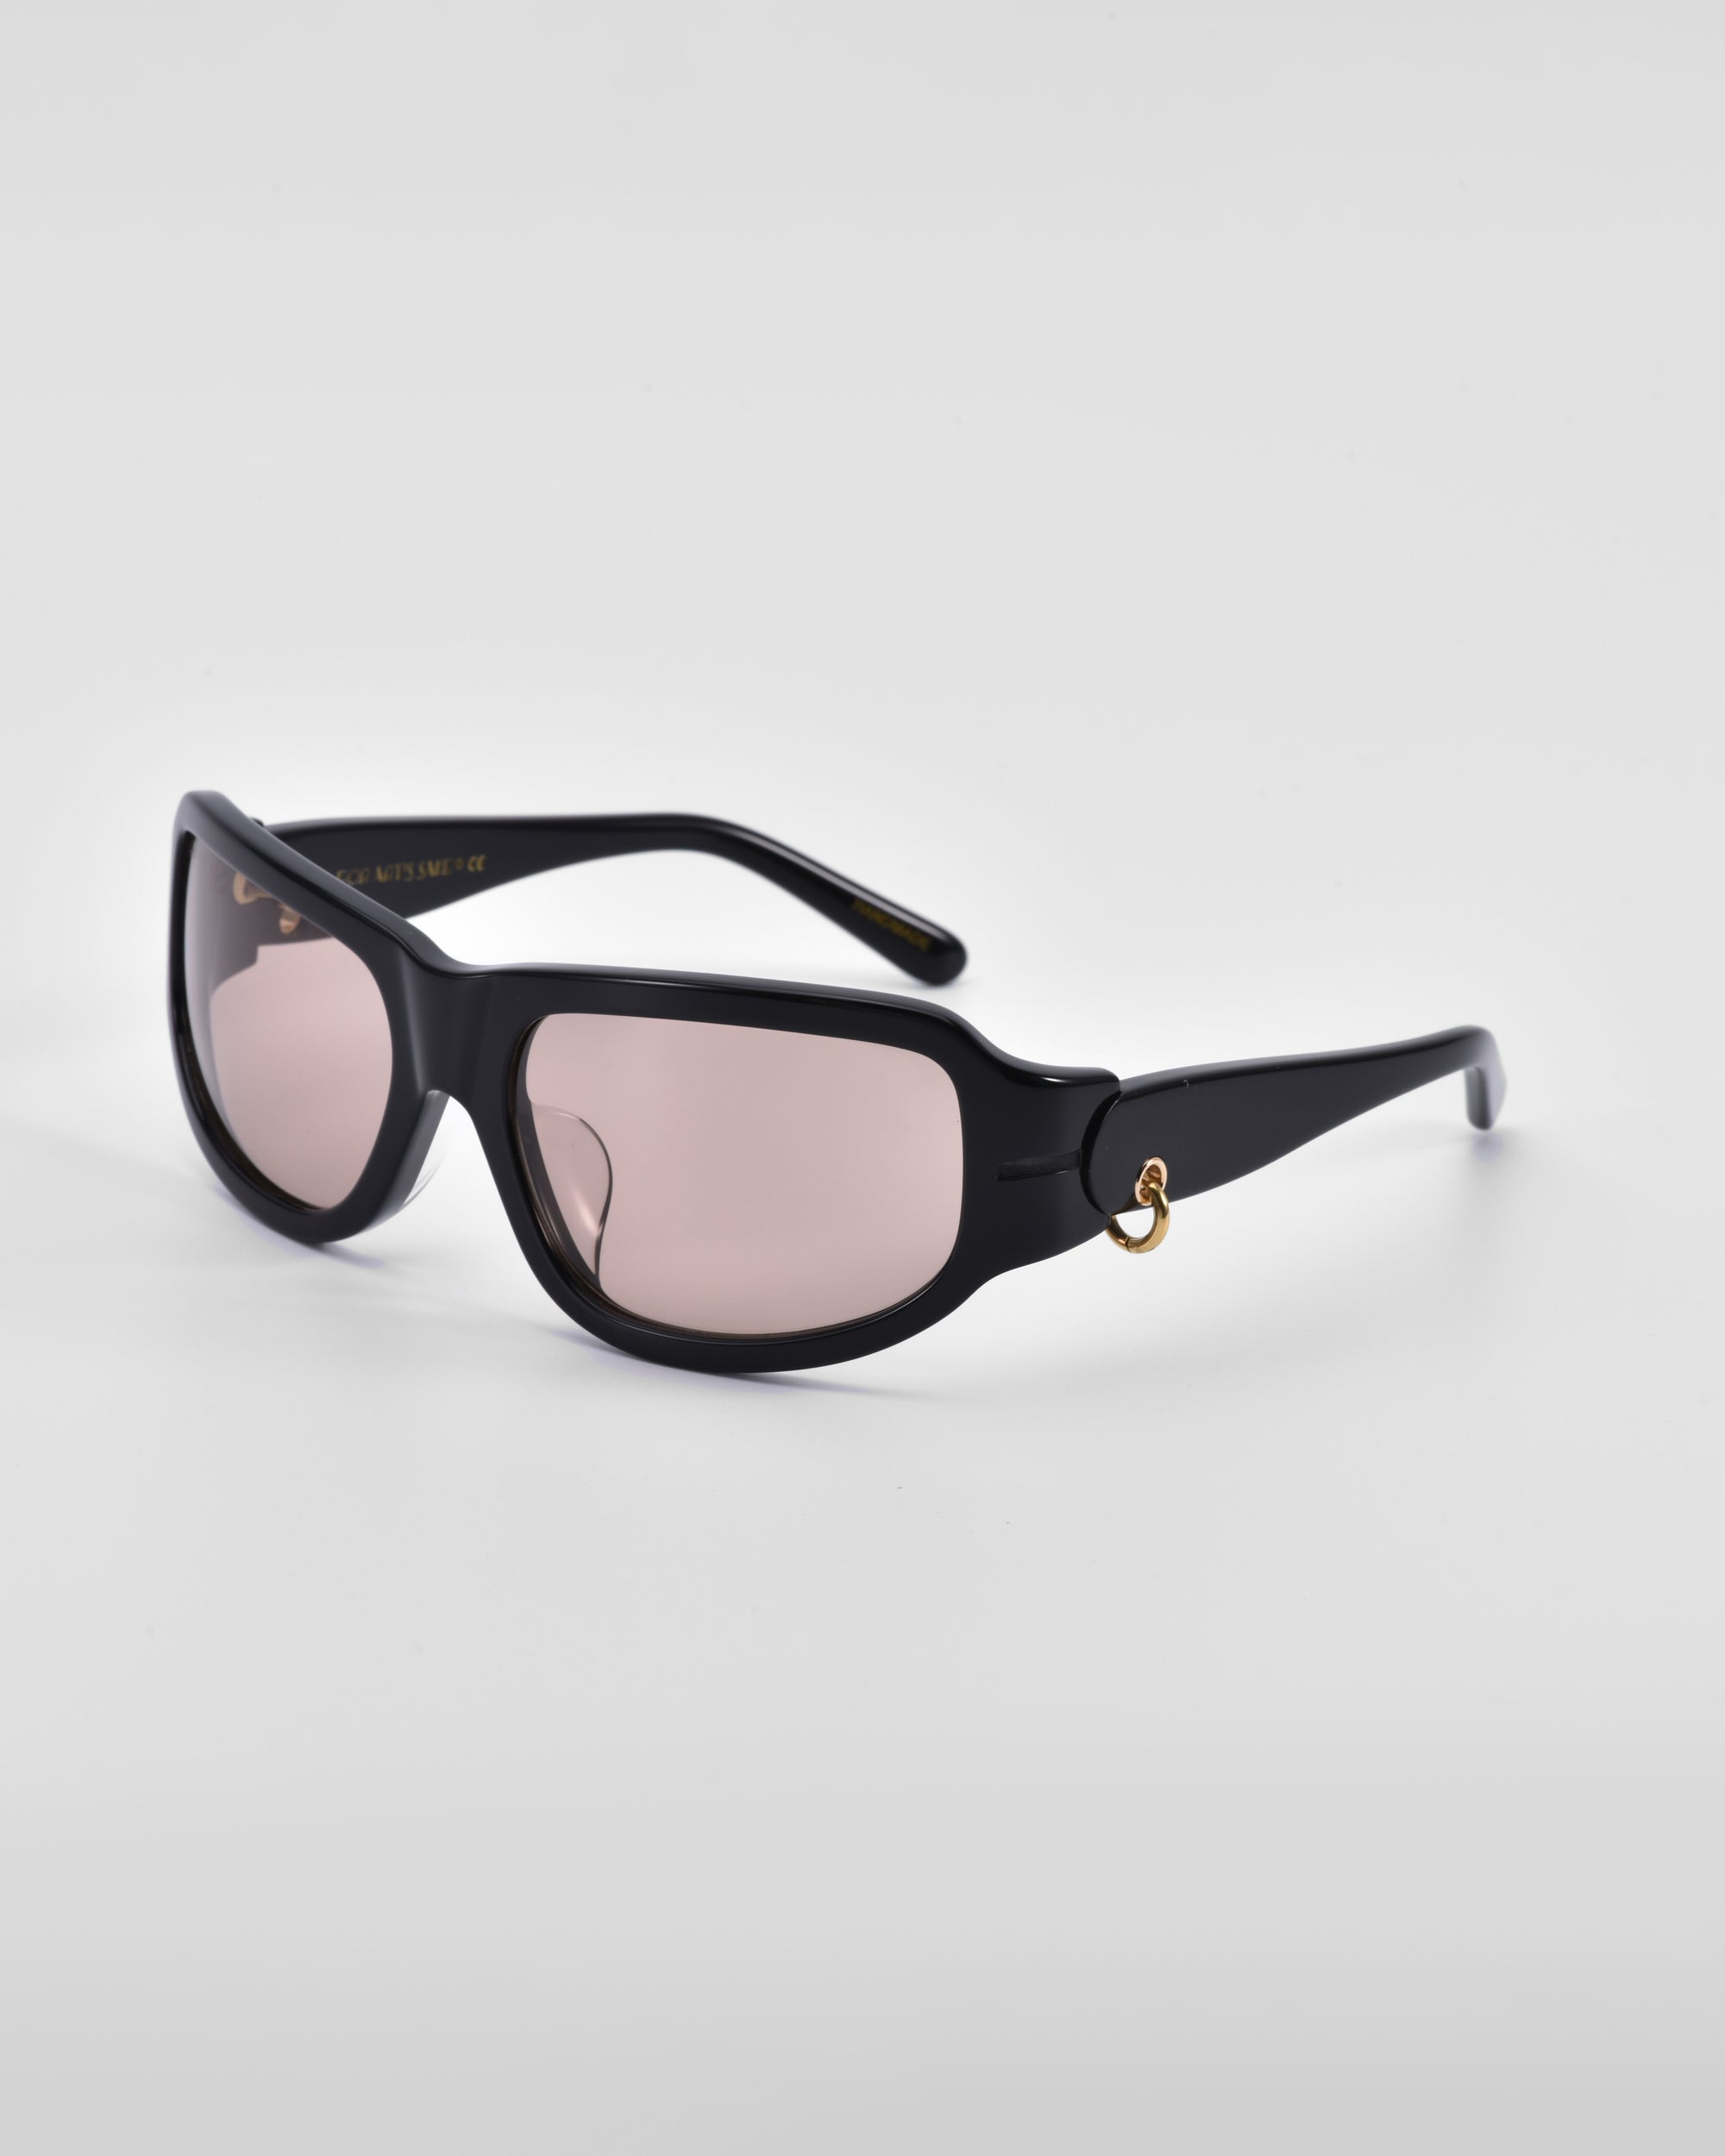 A pair of sleek black For Art&#39;s Sake® Raven sunglasses with slightly tinted lenses is displayed against a plain white background. The sunglasses feature a small 18-karat gold ring on each temple, adding a subtle touch of elegance.